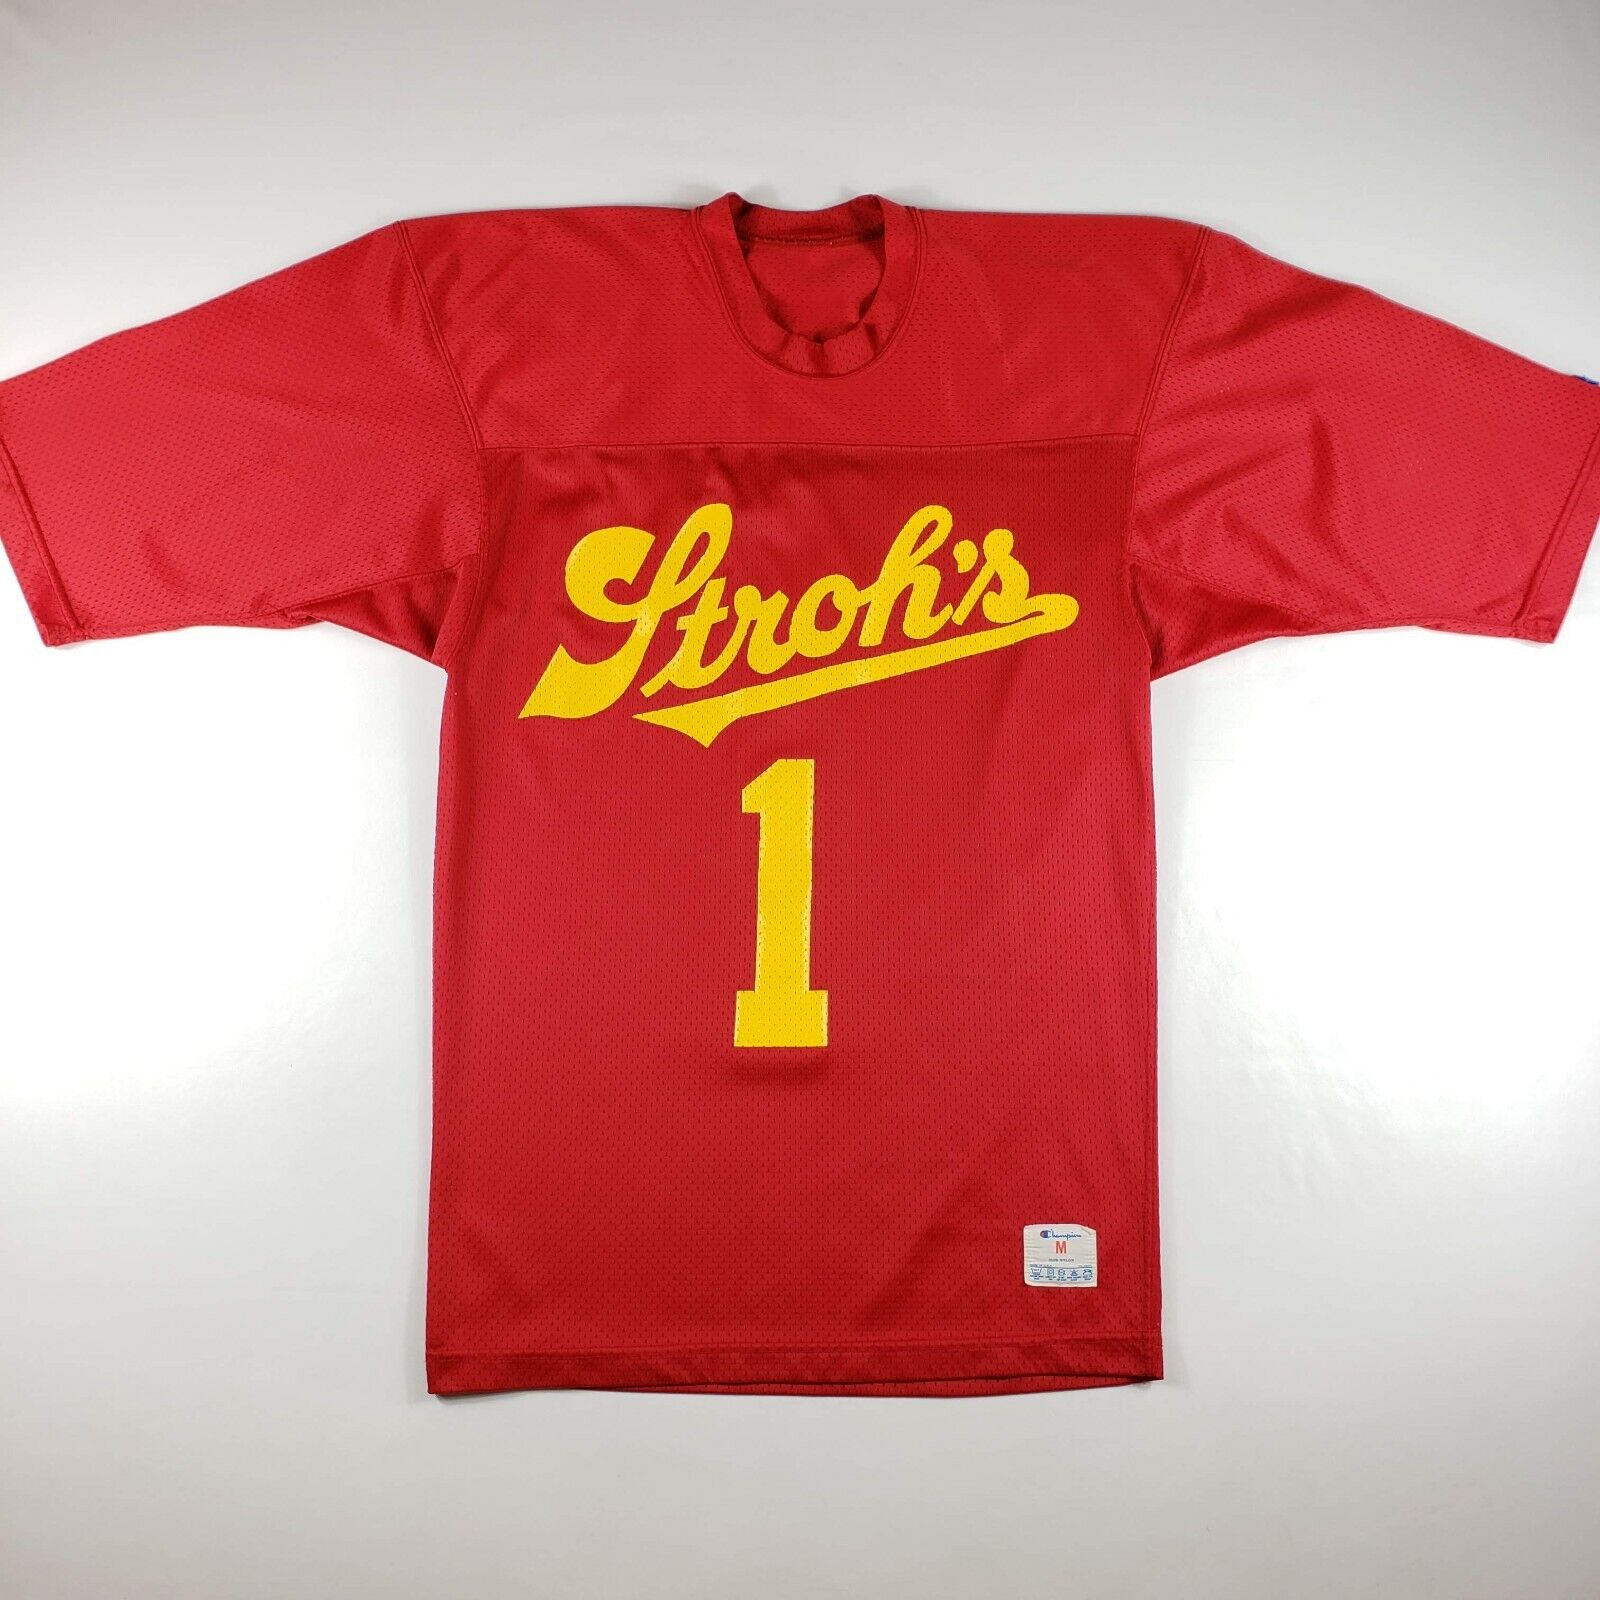 Vintage Stroh's Beer Champion Football 70% OFF Discount is also underway Outlet Yellow Red M Jersey Men's